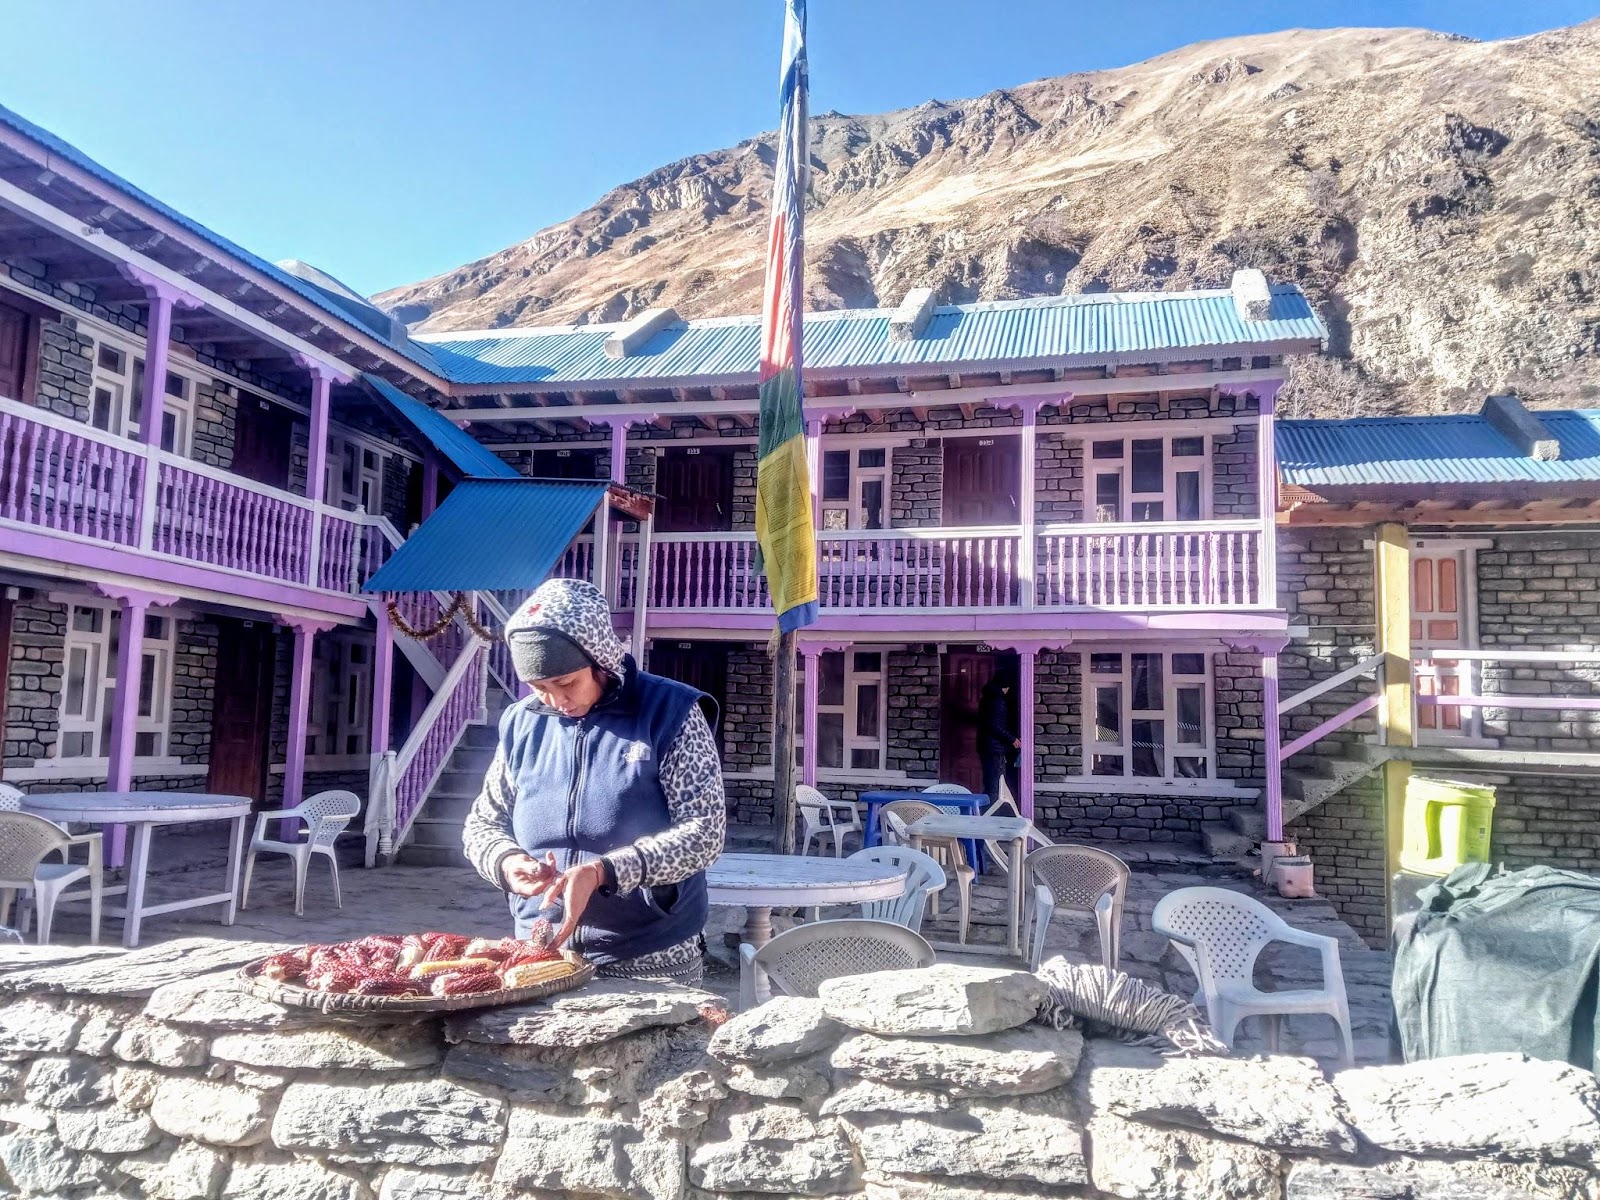 A women preparing to dry maize in the sun in one of the hotels in Manang region.